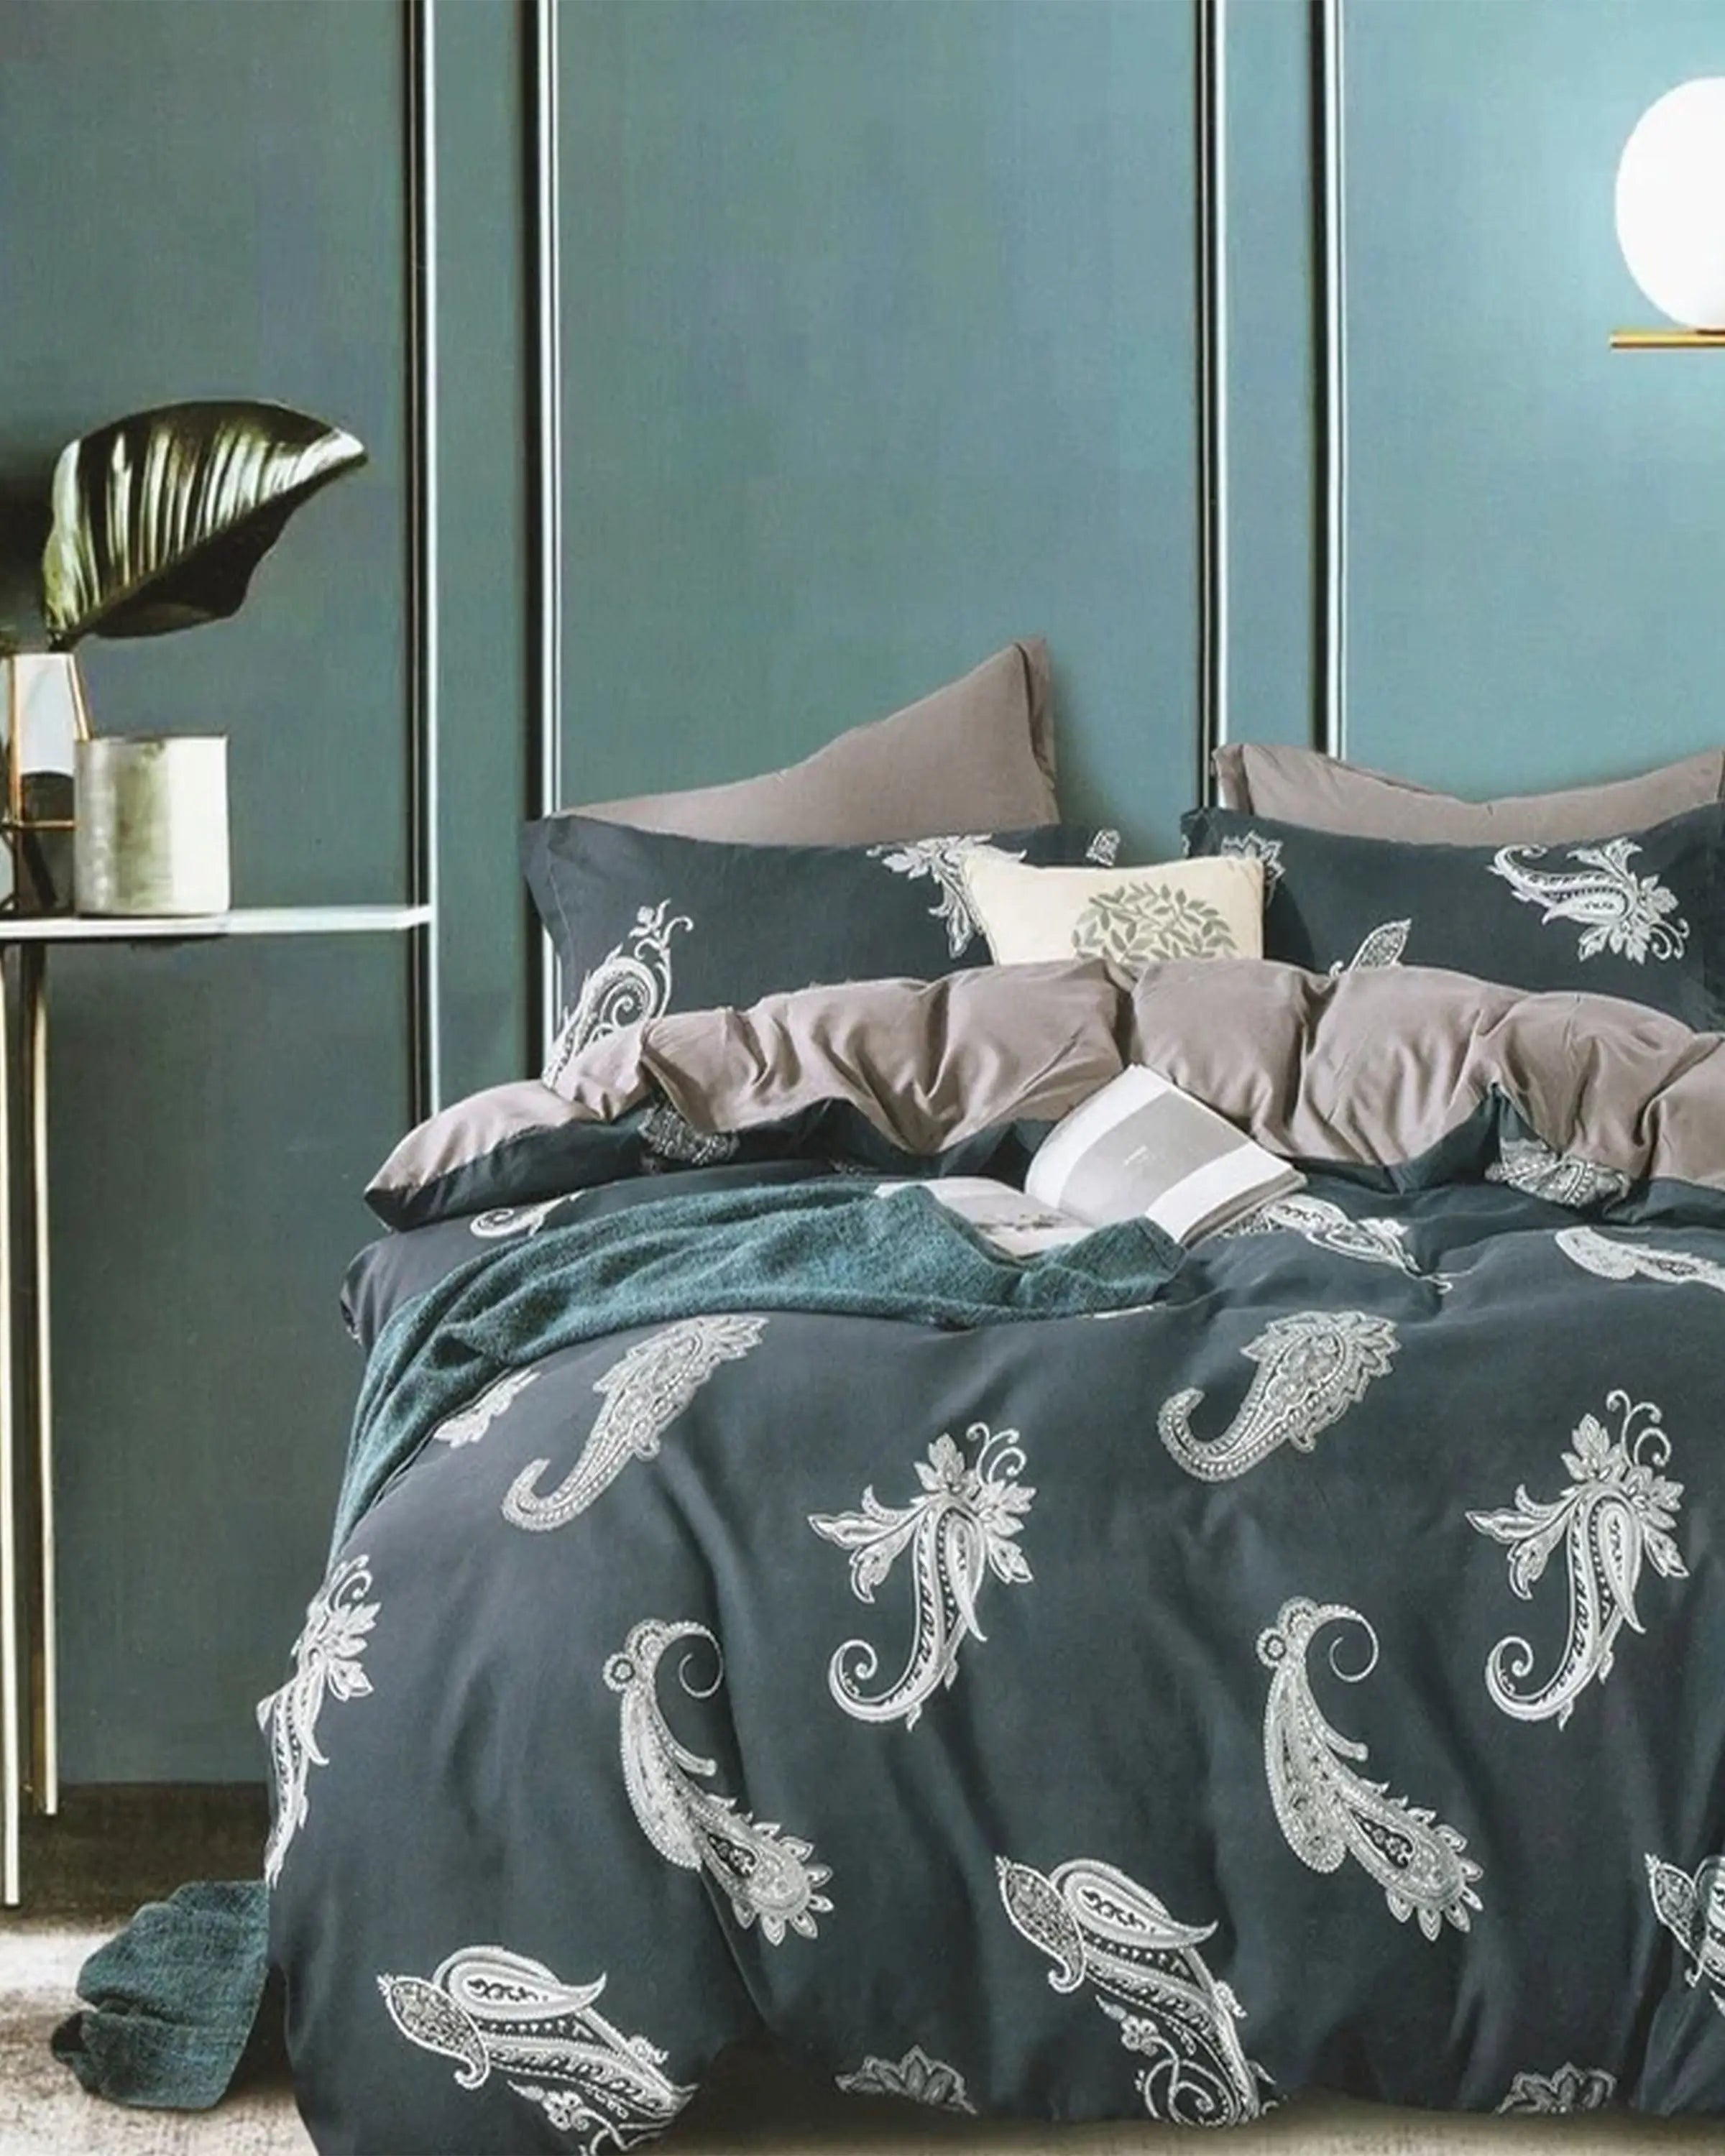  Buy Luxury Queen Size Bedding Available Online